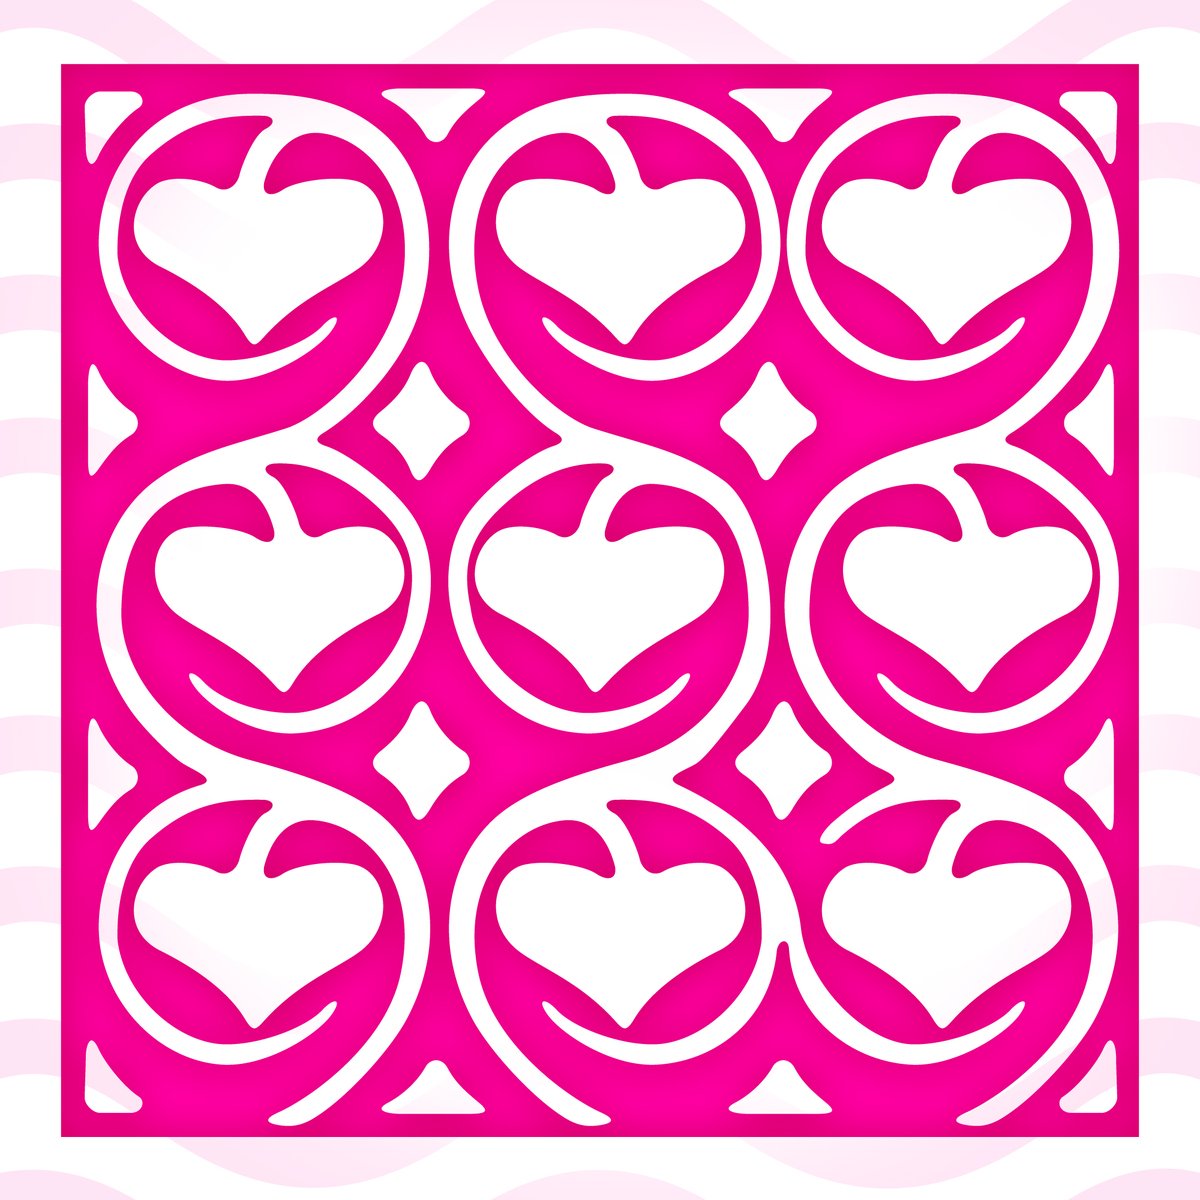 a heart shaped cutout in pink and white